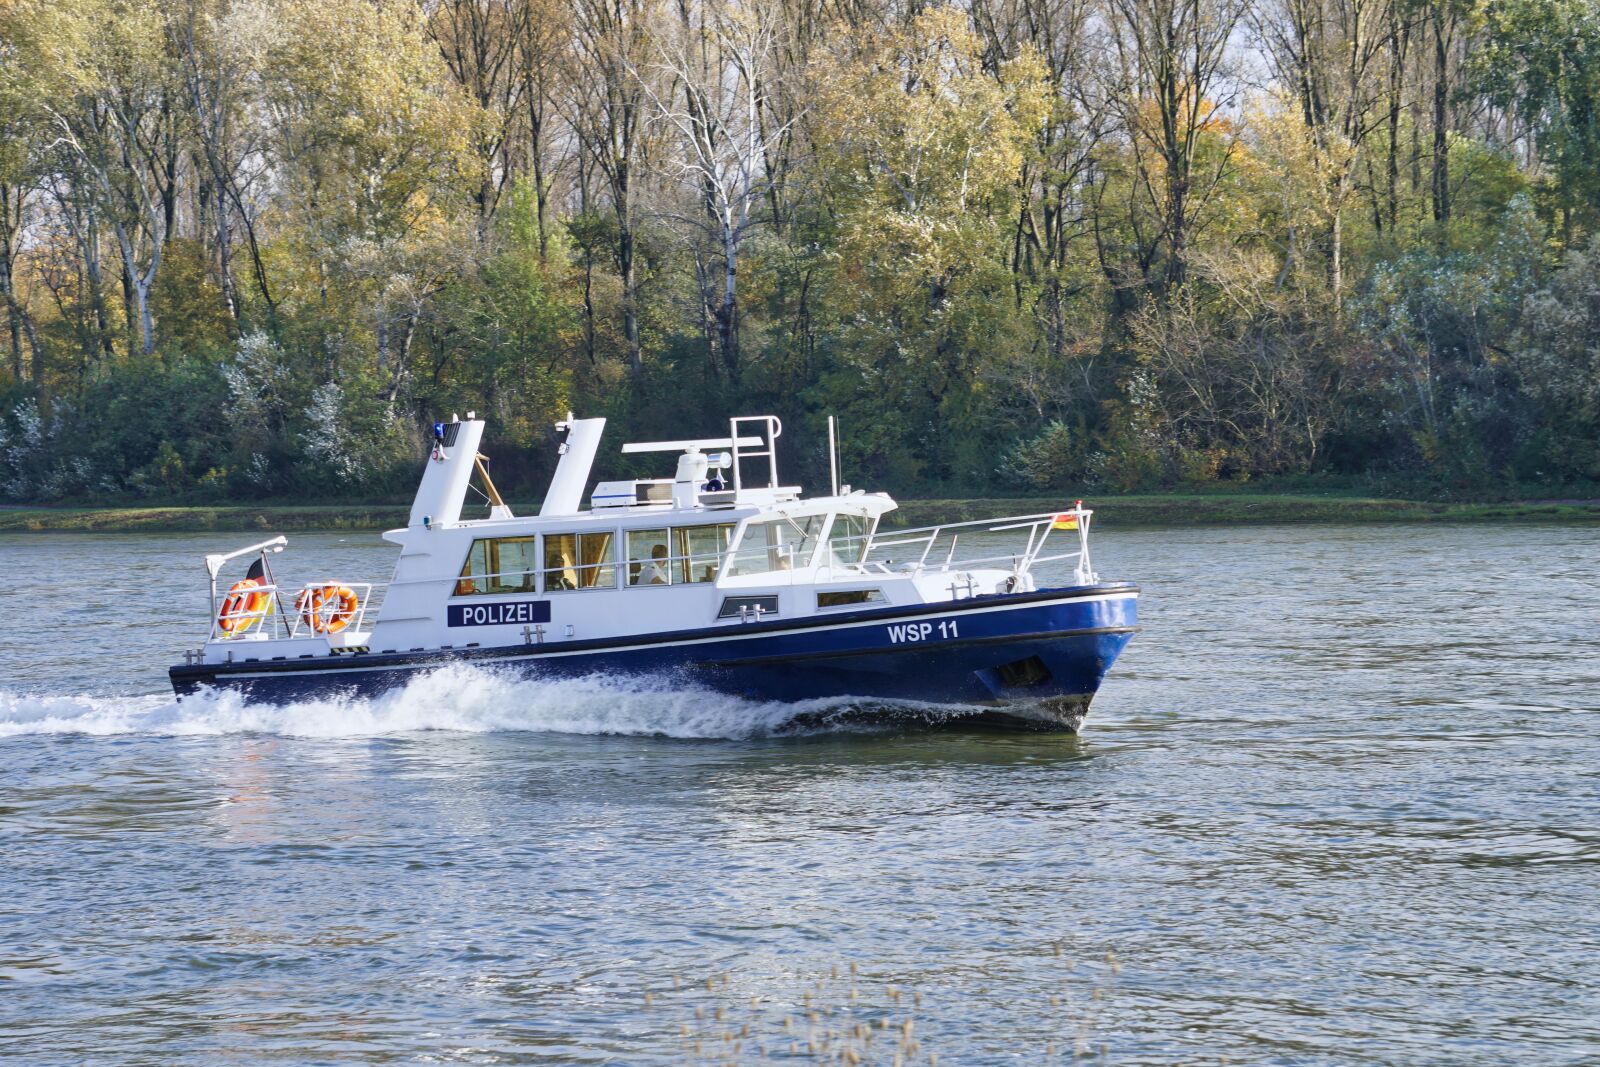 Sony a6500 + Sony E 55-210mm F4.5-6.3 OSS sample photo. Police boat, police, water photography